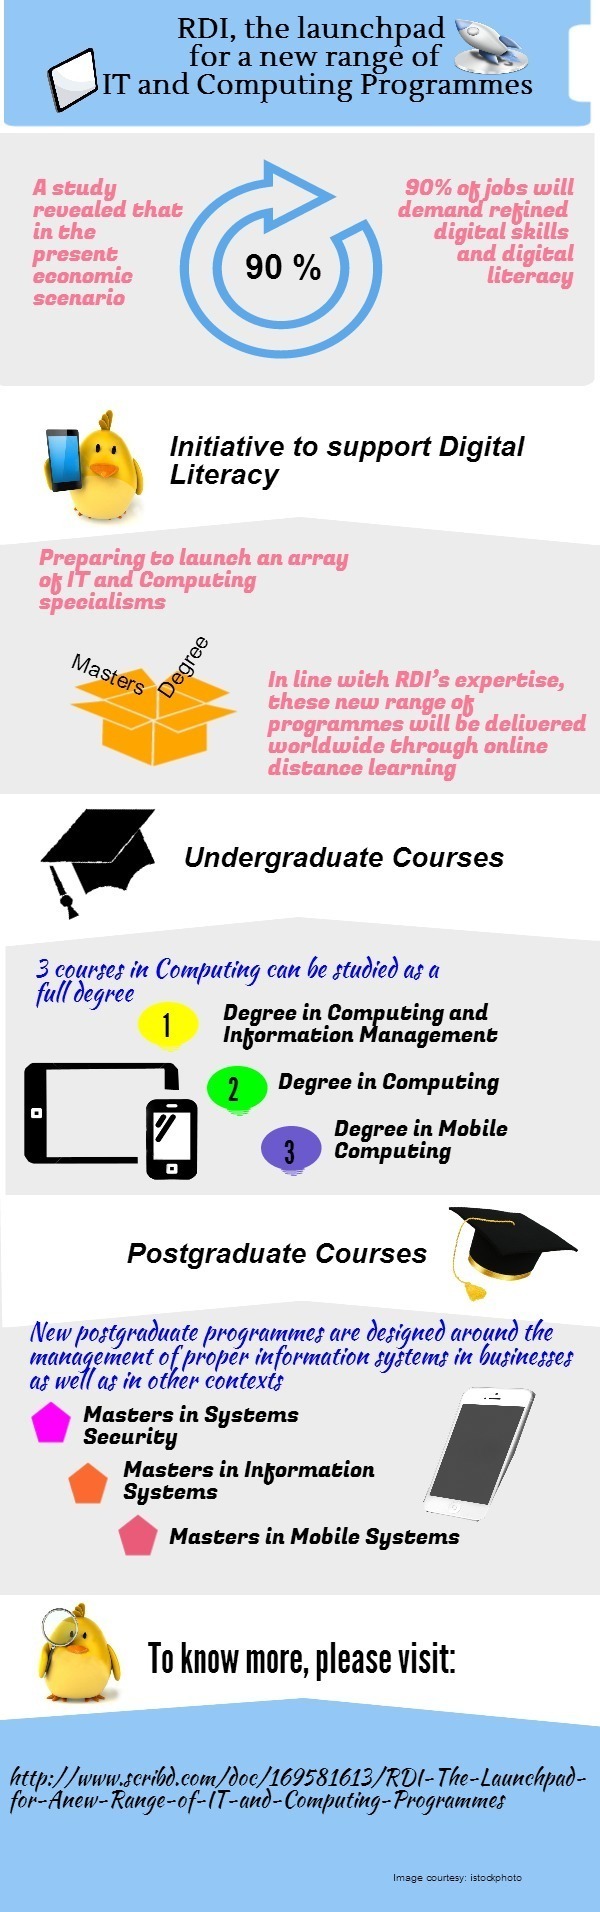 RDI, IT and Computing Programs Distance Education Infographic